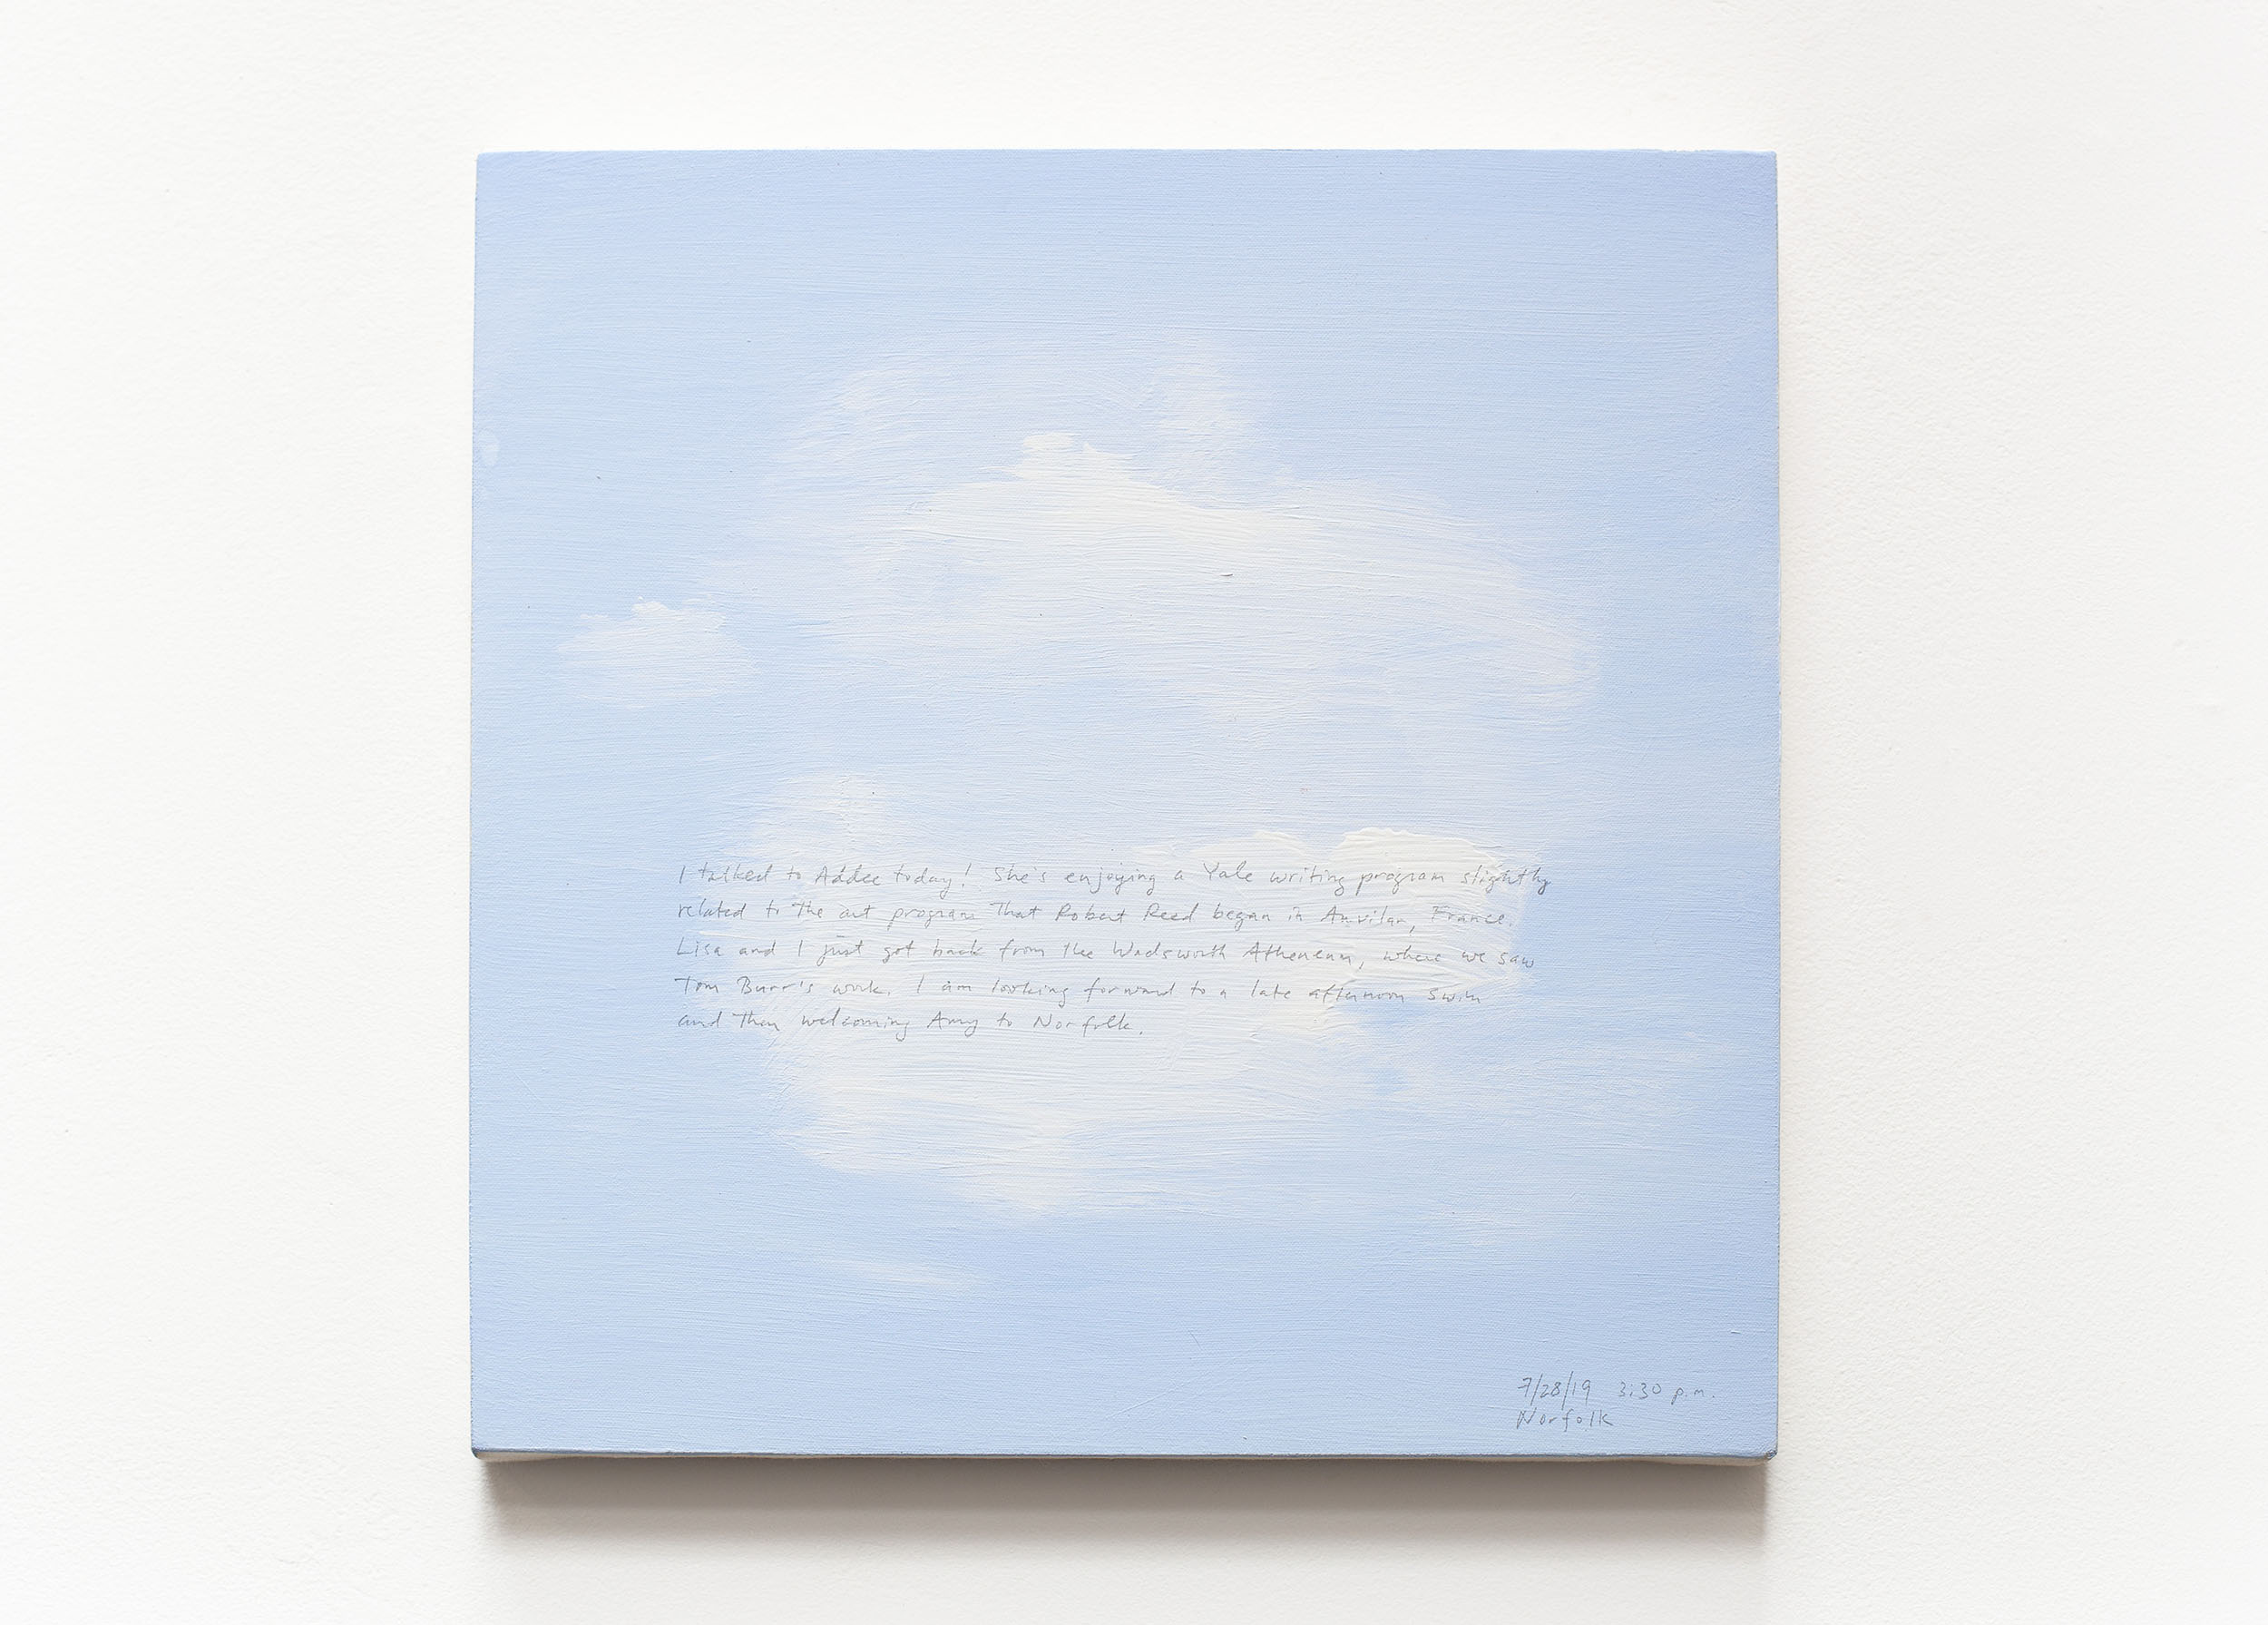 A 14 × 14 inch, acrylic painting of the sky. A journal entry is handwritten on the painting:

“I talked to Addee today! She’s enjoying a Yale writing program slightly related to the art program that Robert Reed began in Anvilar, France. Lisa and I just got back from the Wadsworth Atheneum, where we saw Tom Burr’s work. I am looking forward to a late afternoon swim and then welcoming Amy to Norfolk.

7/28/19 3:30 p.m.
Norfolk”